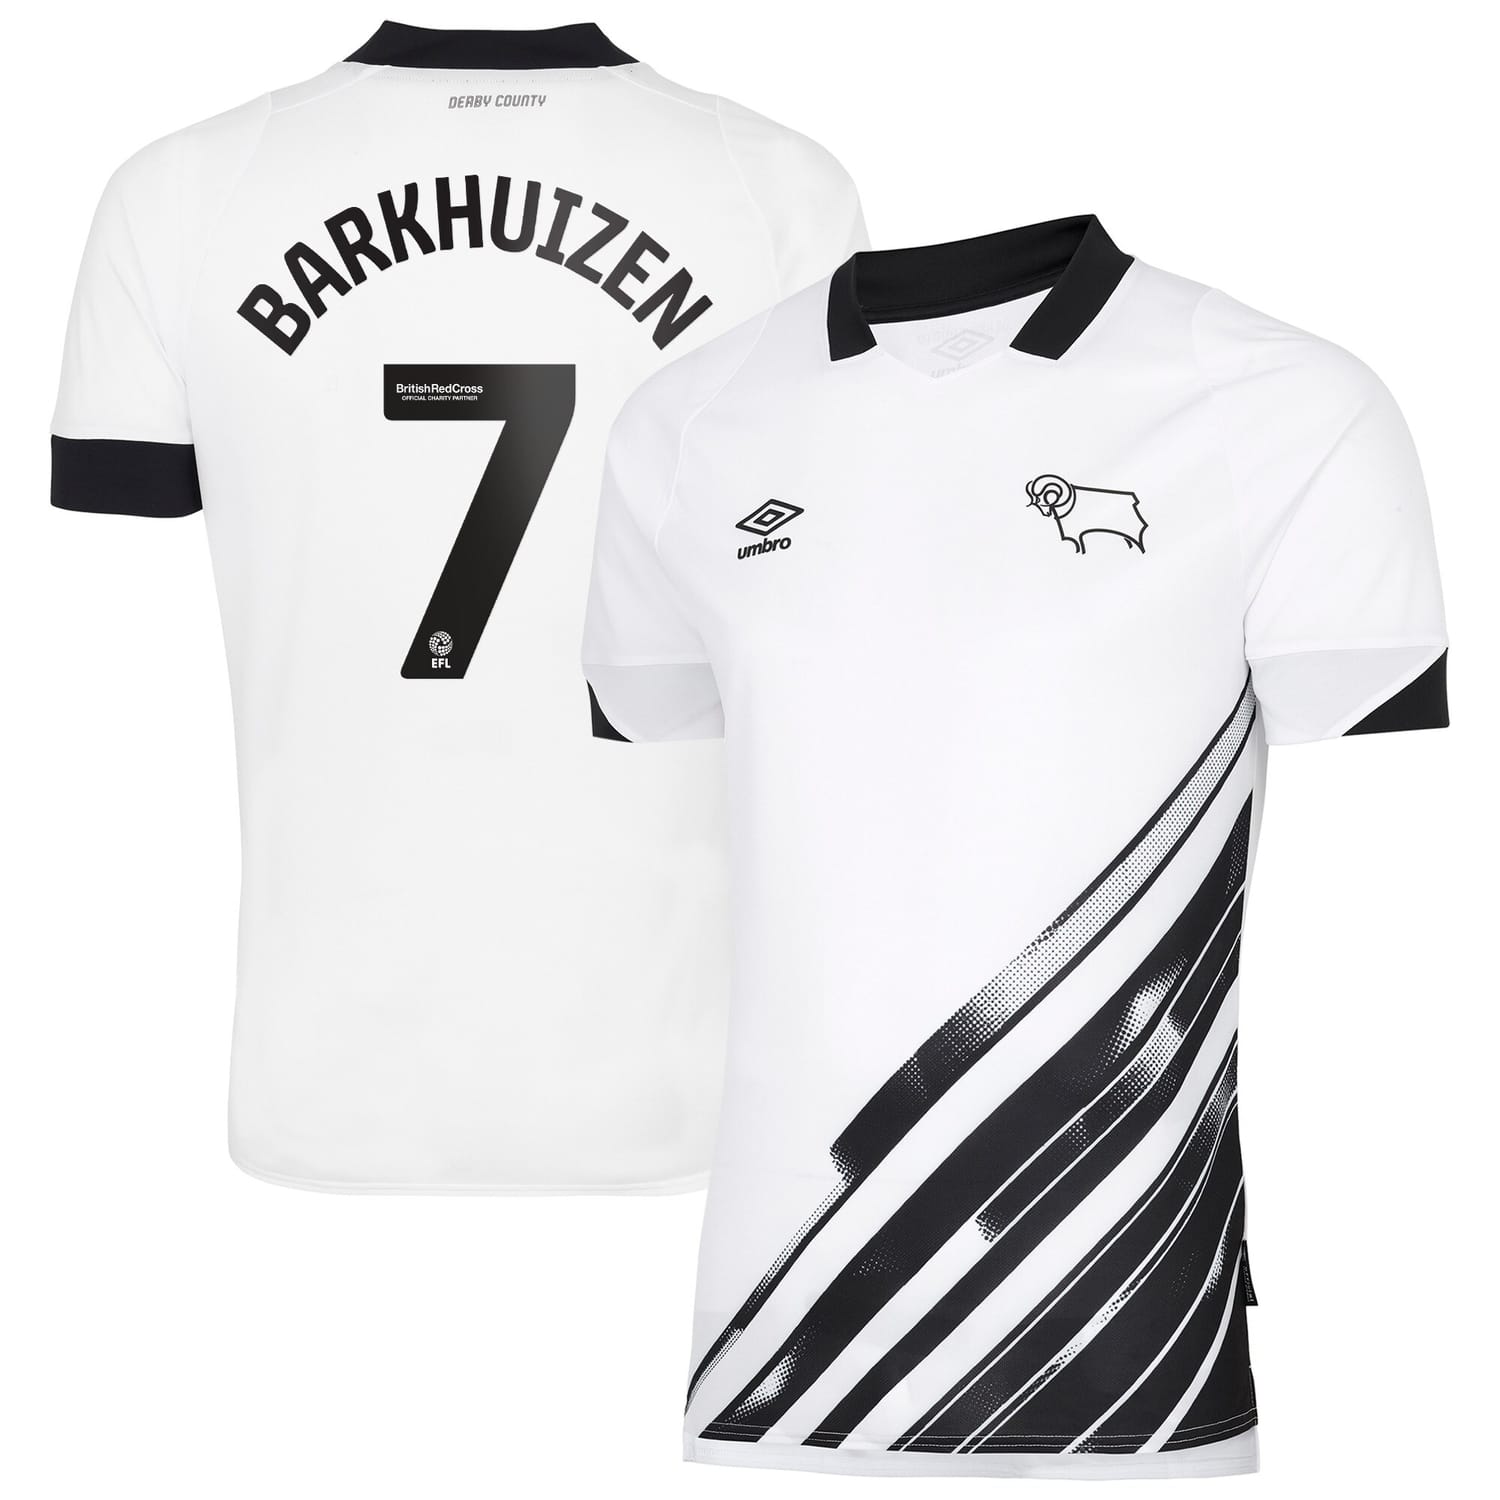 EFL League One Derby County Home Jersey Shirt 2022-23 player Barkhuizen 7 printing for Men